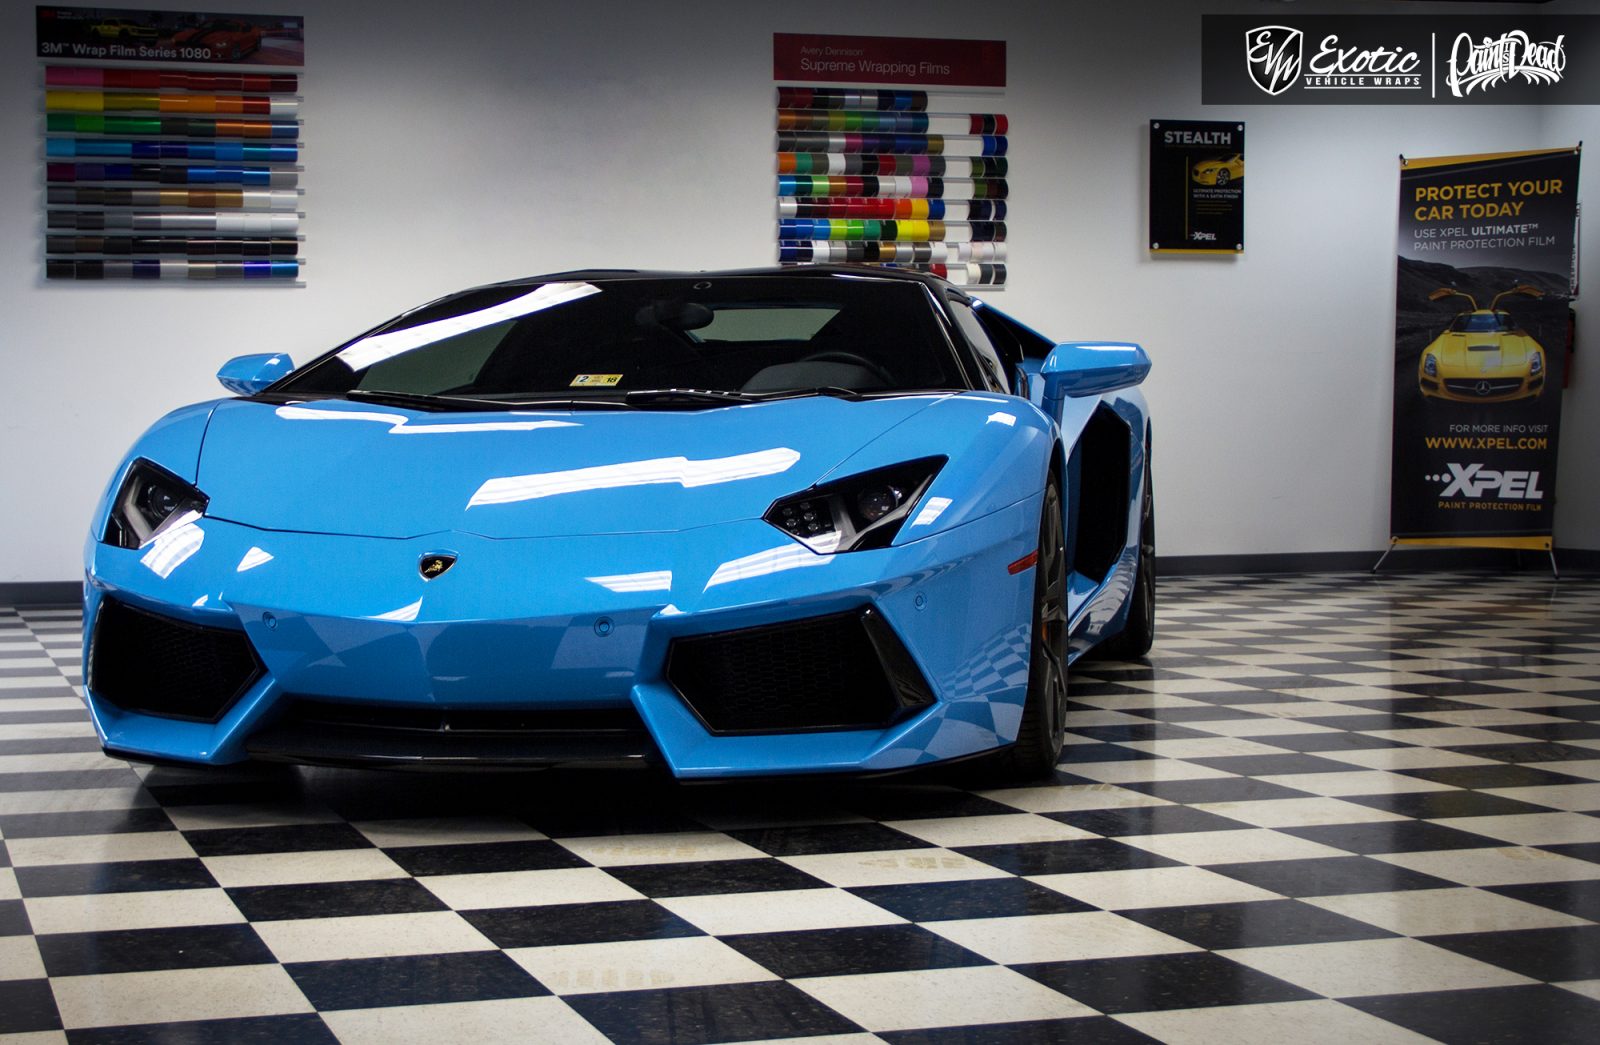 Luxury and Exotic Car Wraps and Paint Protection